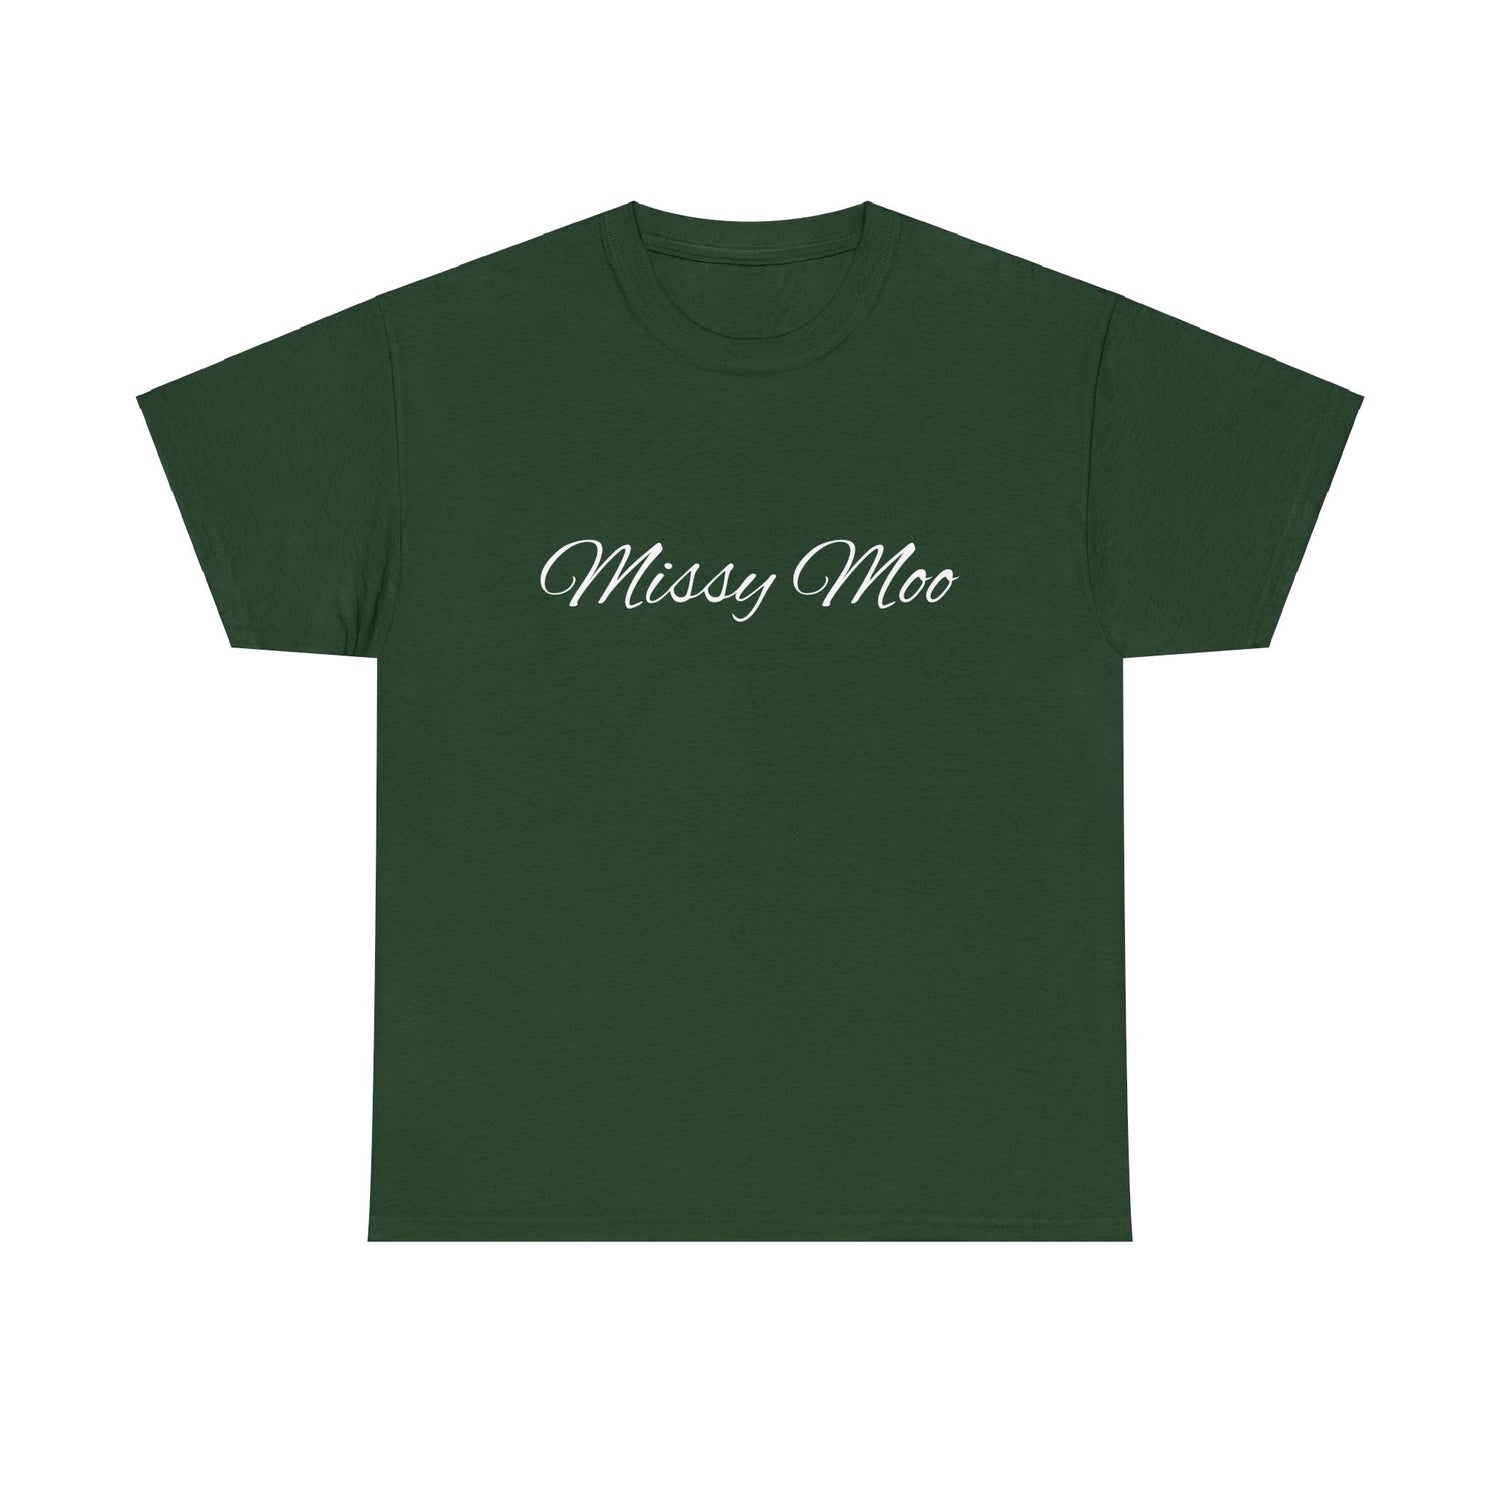 Signature Ladies Tee - Forest Green